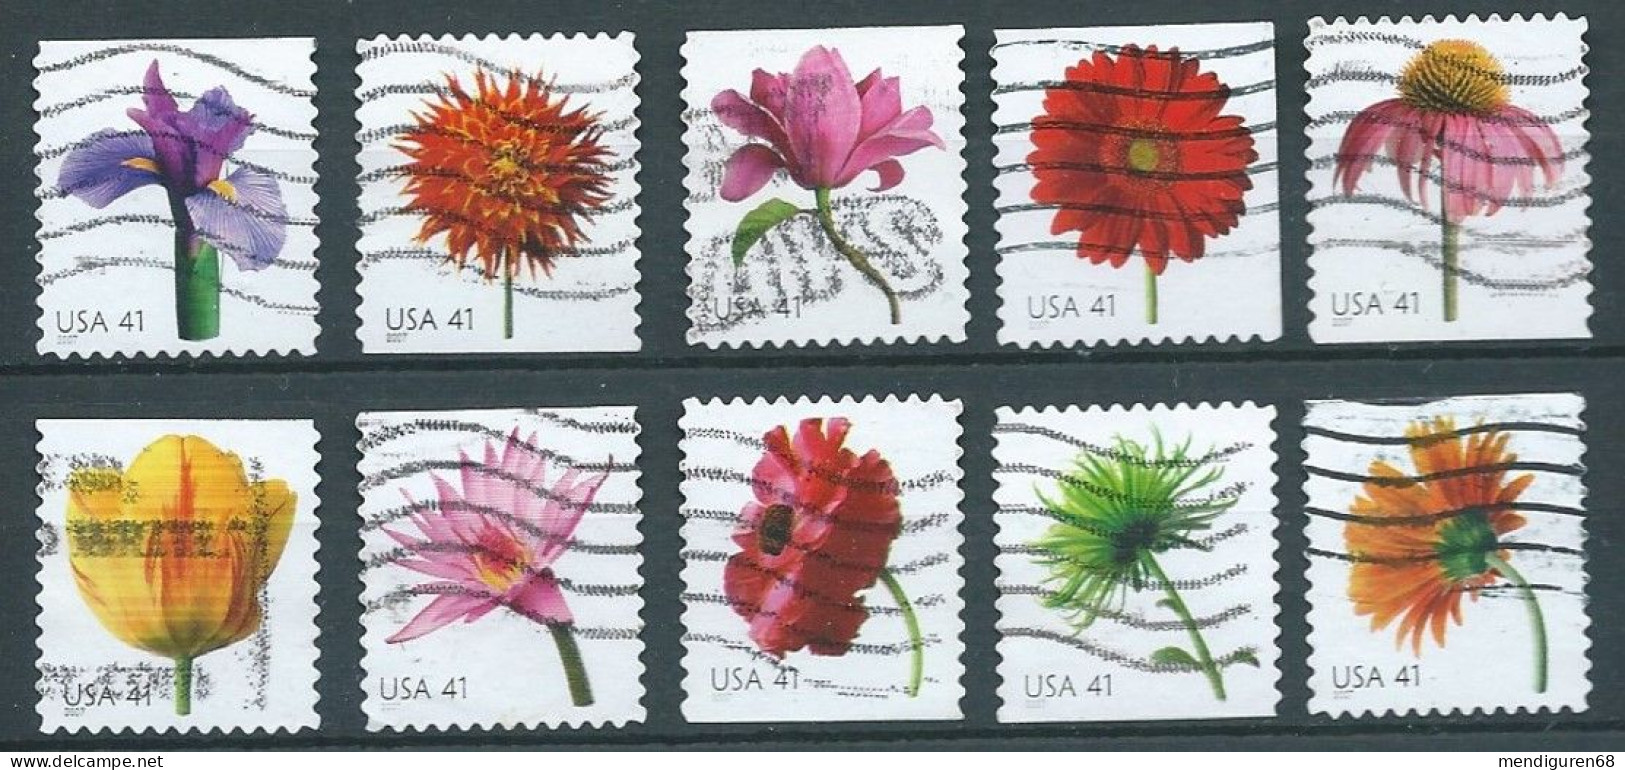 VERINIGTE STAATEN ETAS UNIS USA 2007 FROM BLKT BEAUTIFUL BLOOMS SET 10V USED SC 4176-85 YT 3966-75 MI 4283-92 SG 4767-76 - Used Stamps